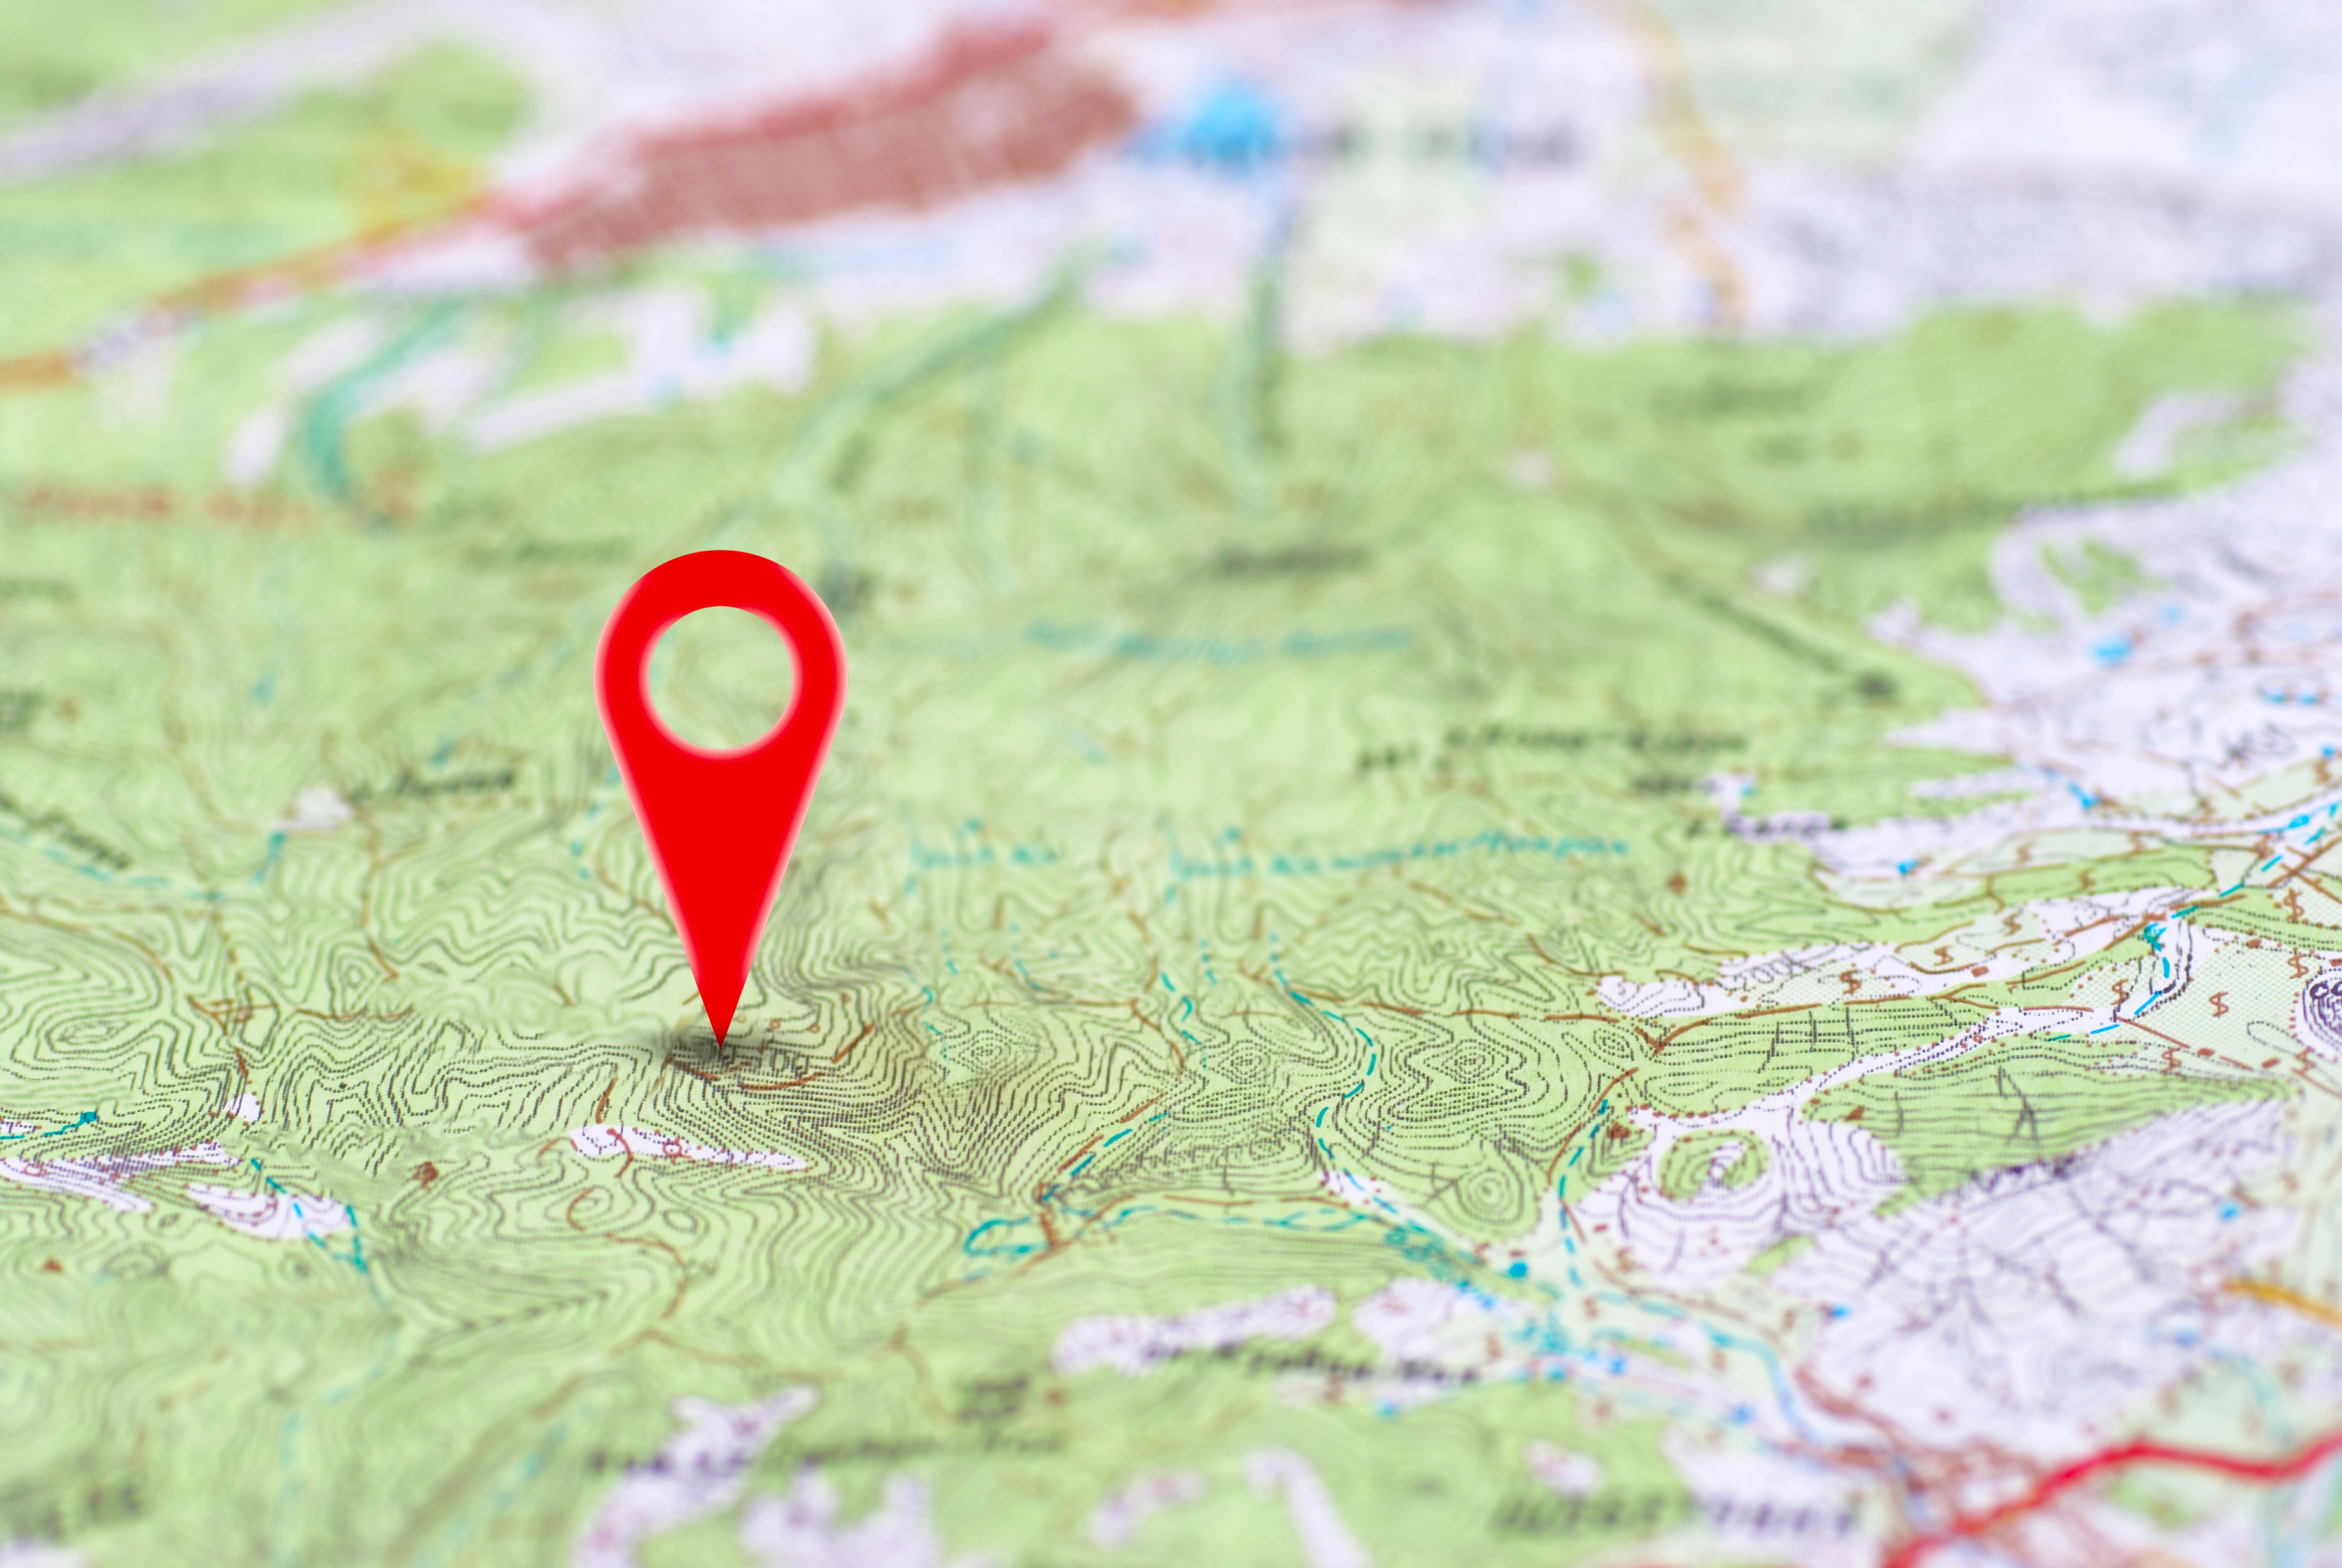 Location Aware Services: A New Wave of Analytics for Business Intelligence